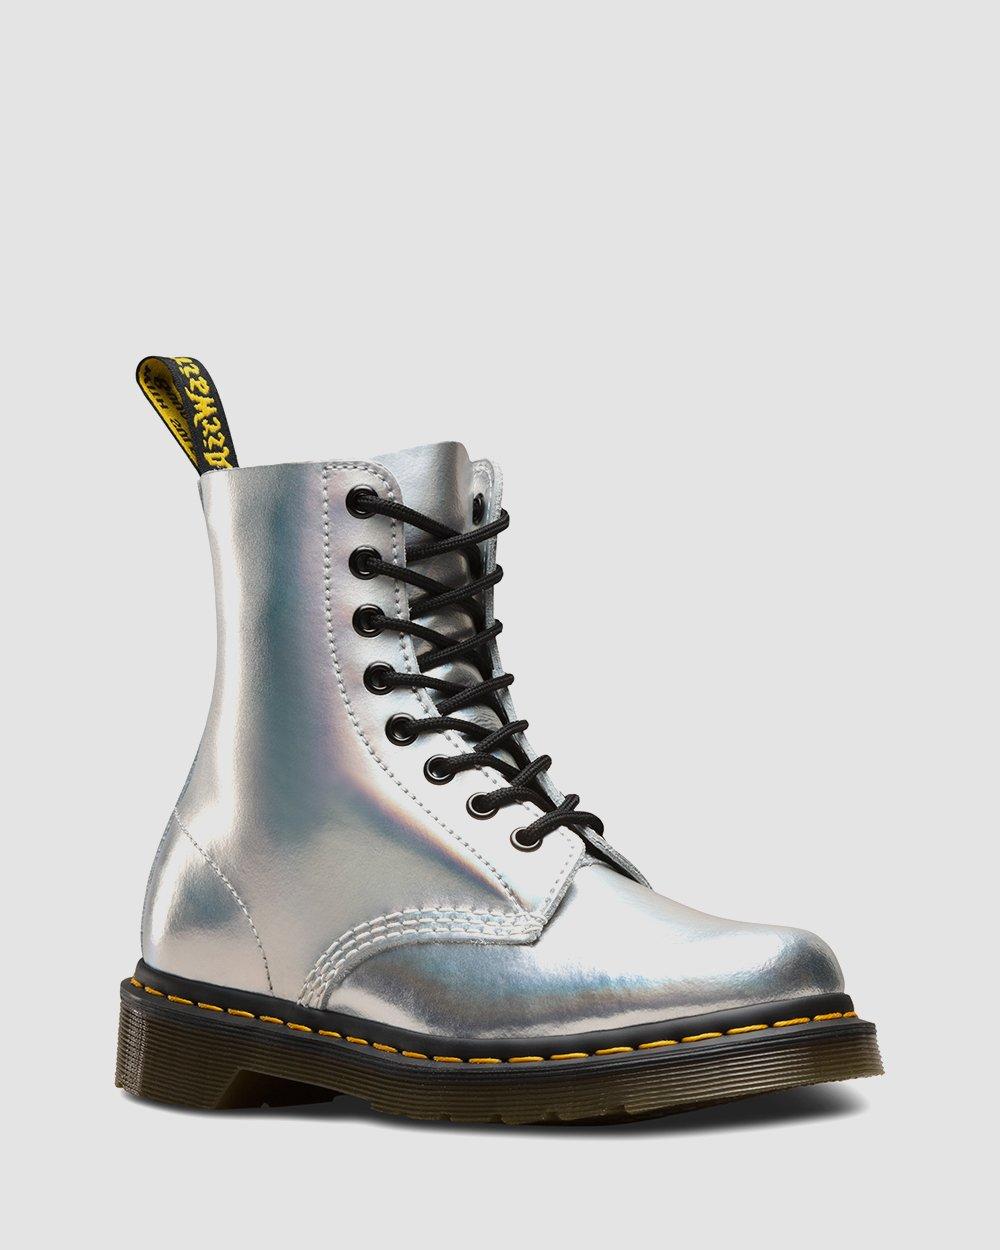 holographic dr martens where to buy 